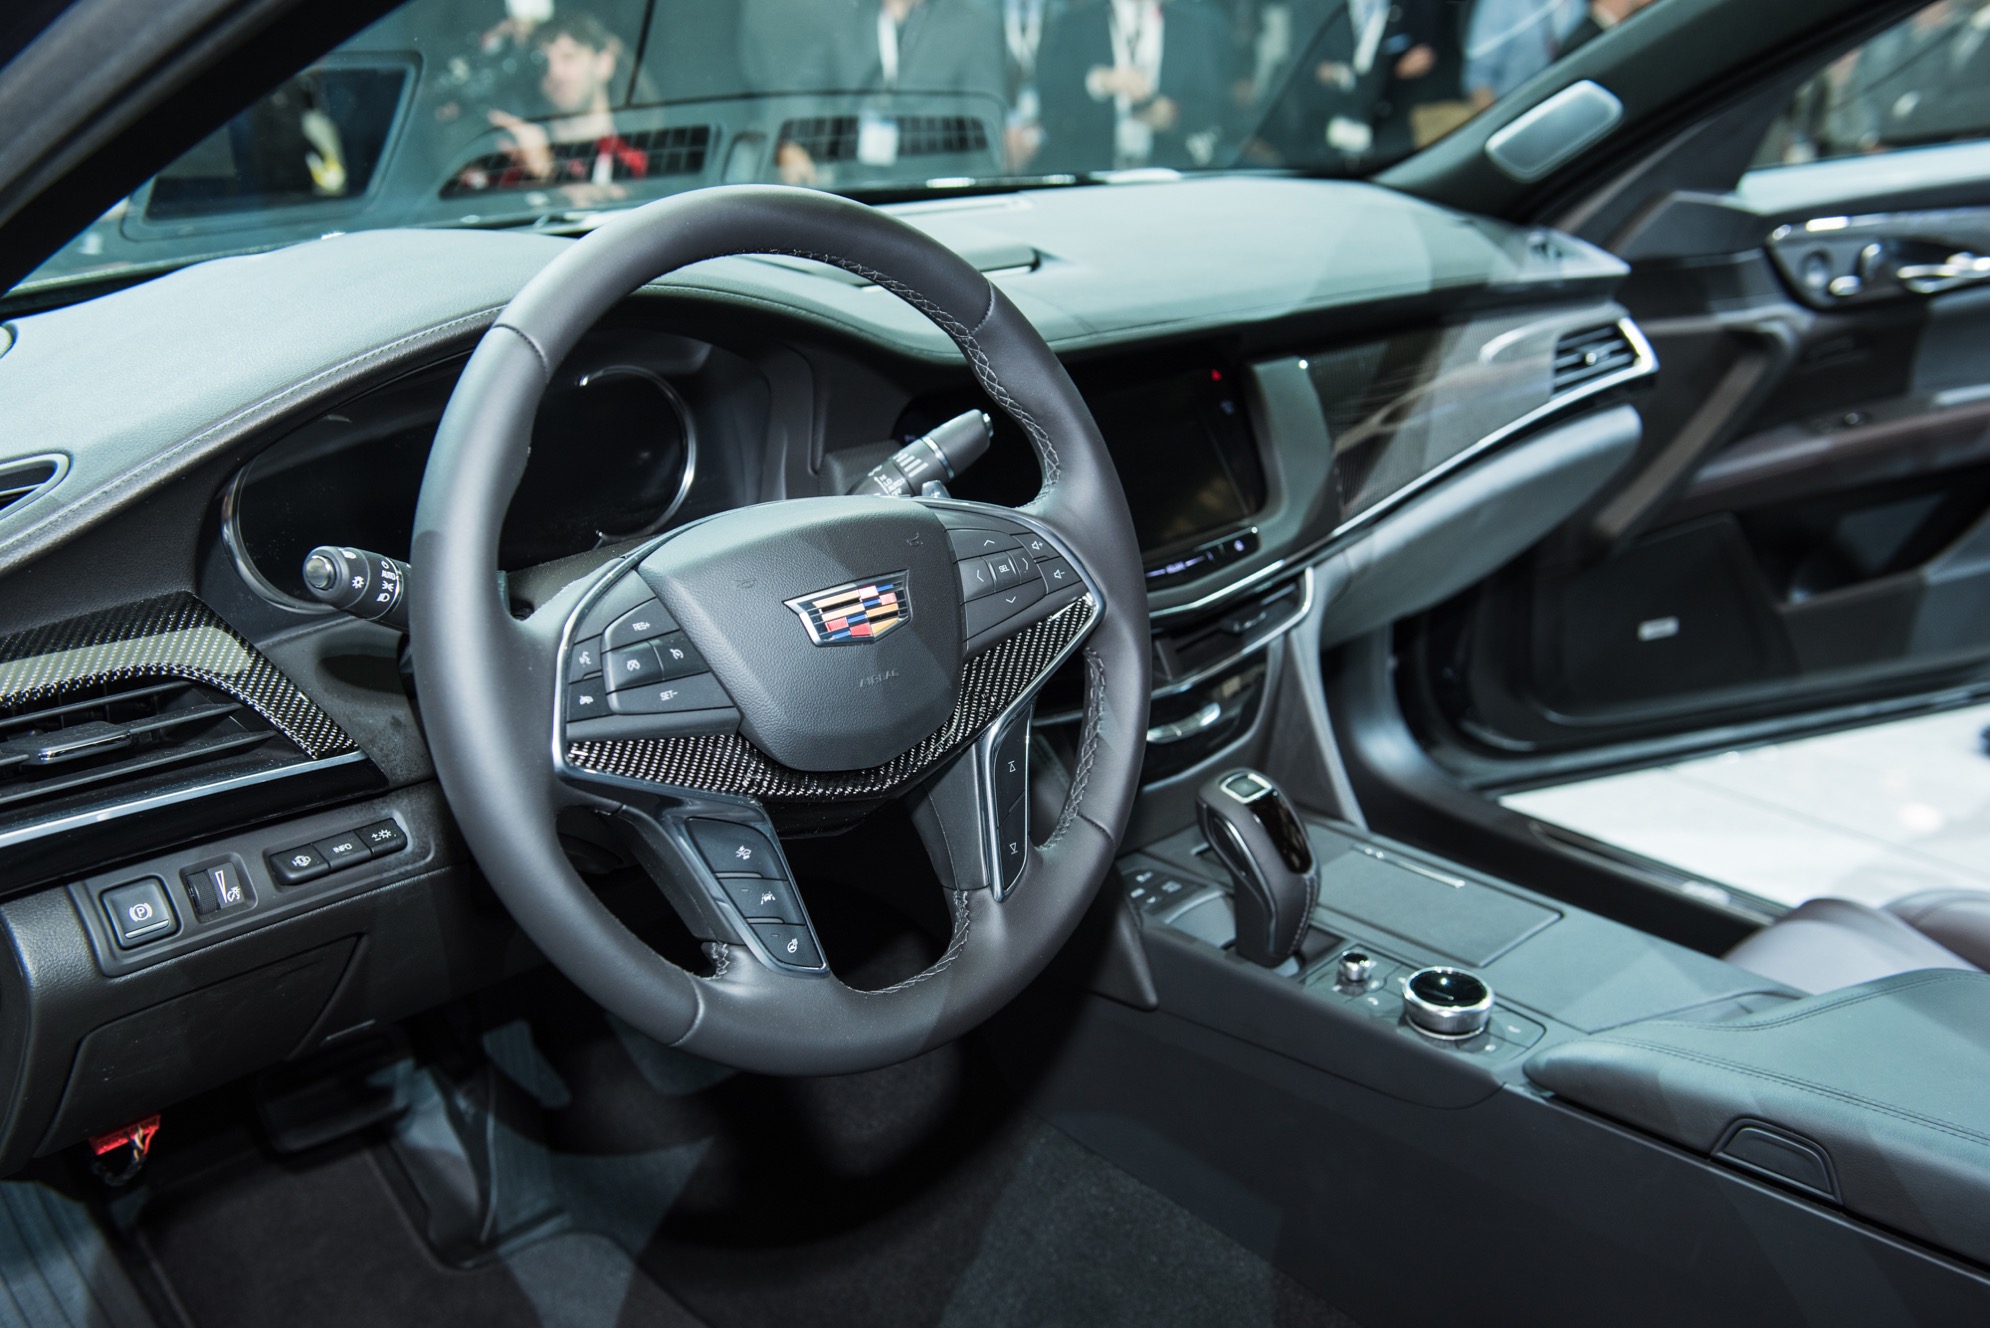 Cadillac CT6-V Gets Various Changes For 2020 Model Year